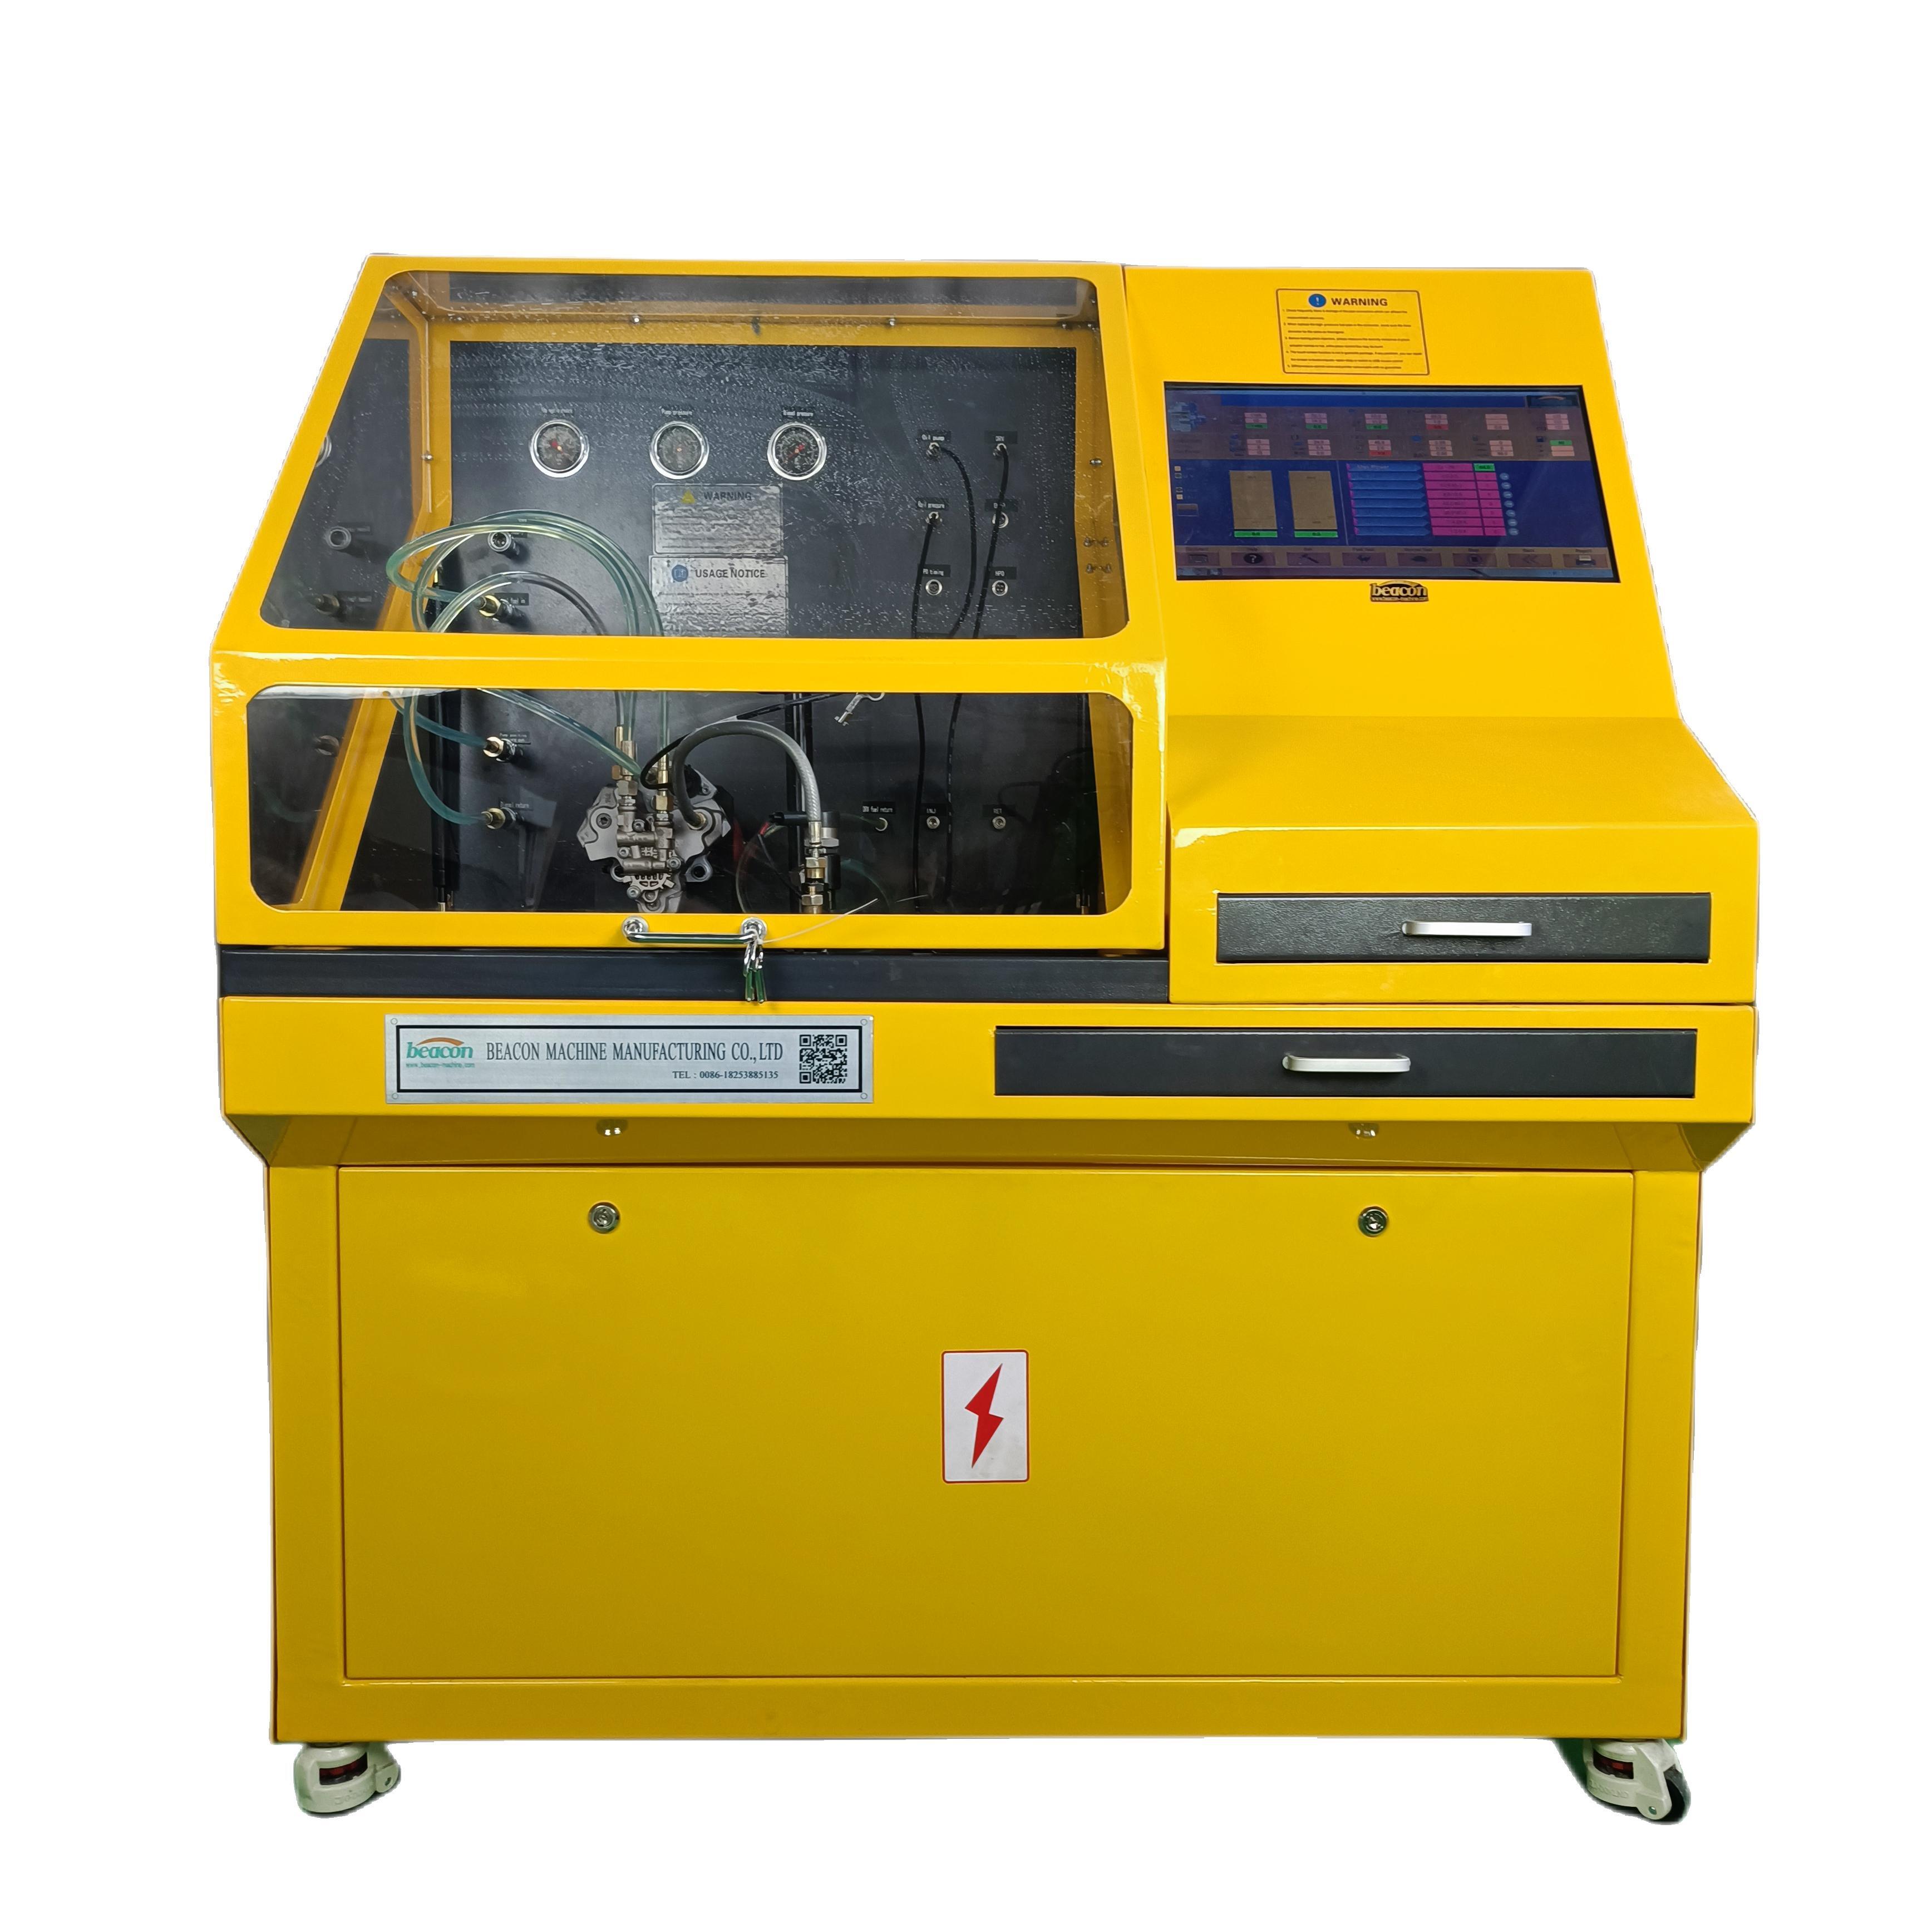 CR301 Common Rail Diesel Pump Test Machine Injector Test Bench With QR Coding Function